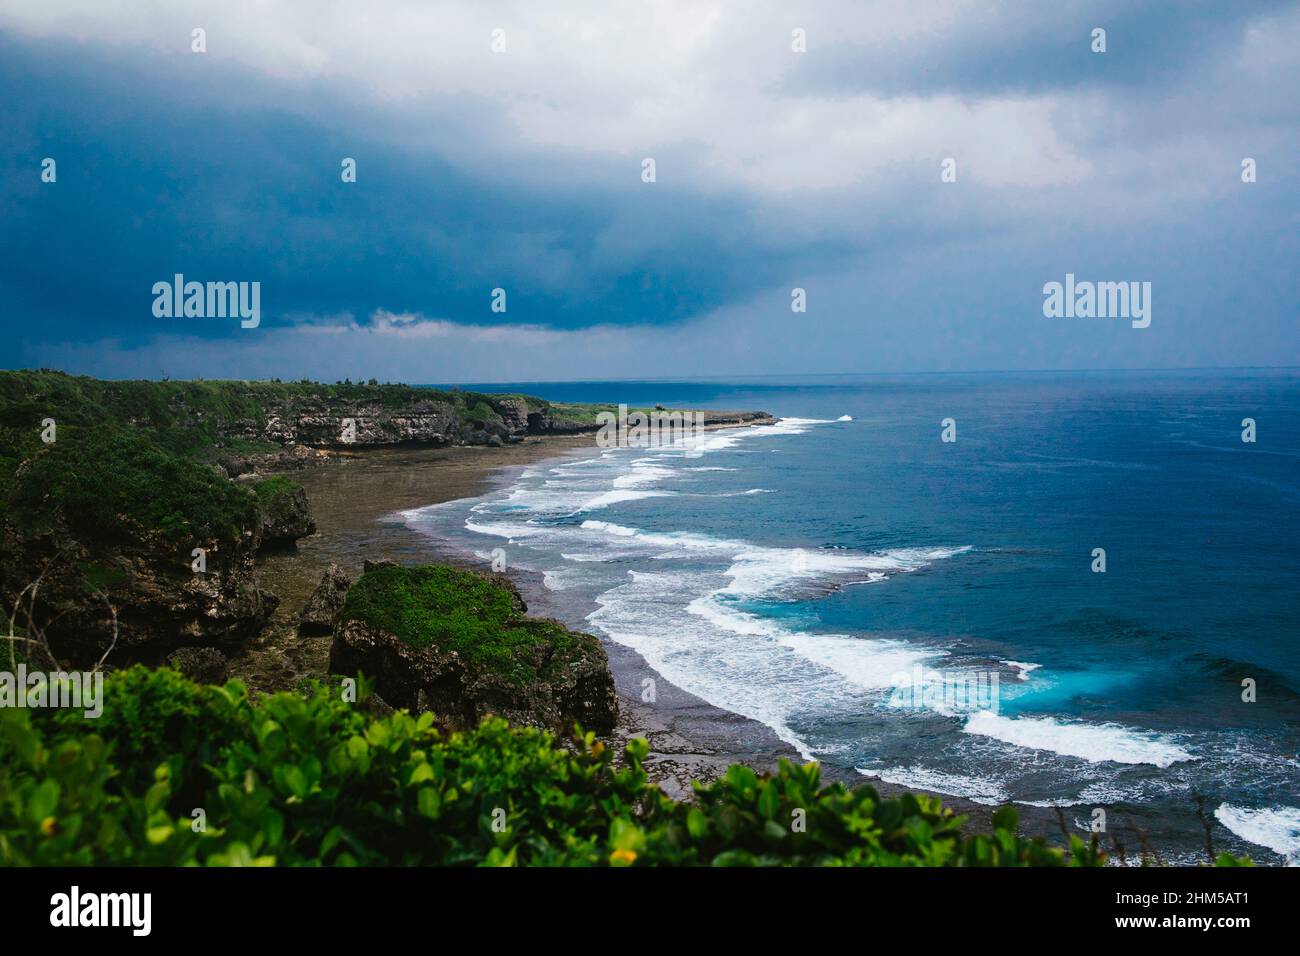 Storm rolls in over ocean and tropical island with waves and clouds Stock Photo